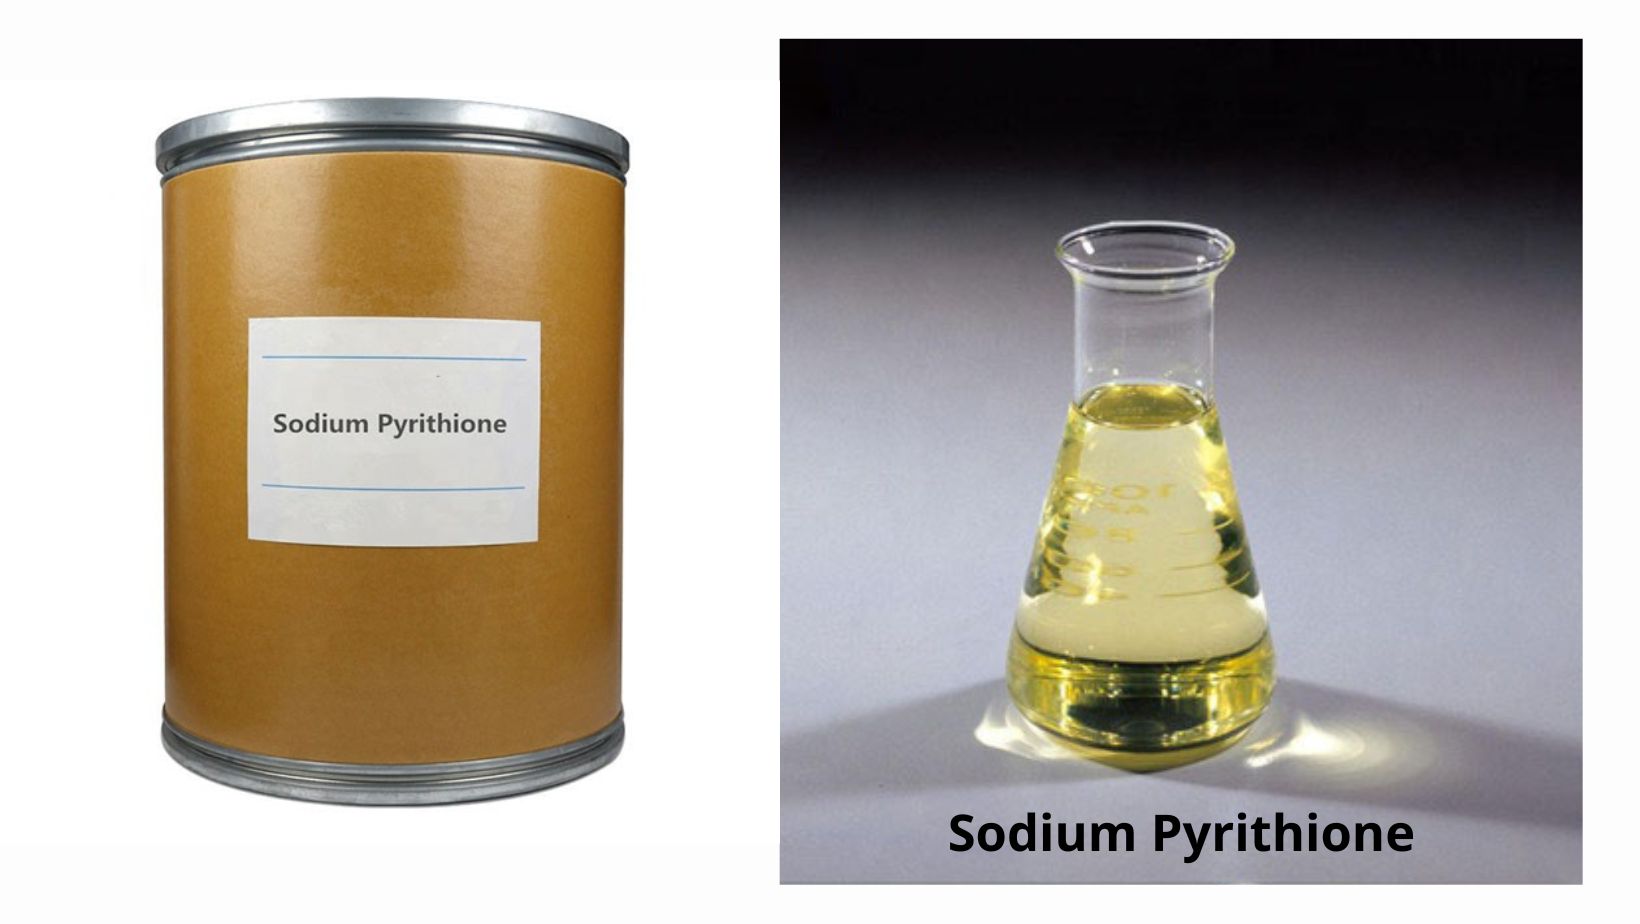 Properties And Uses of Sodium Pyrithione